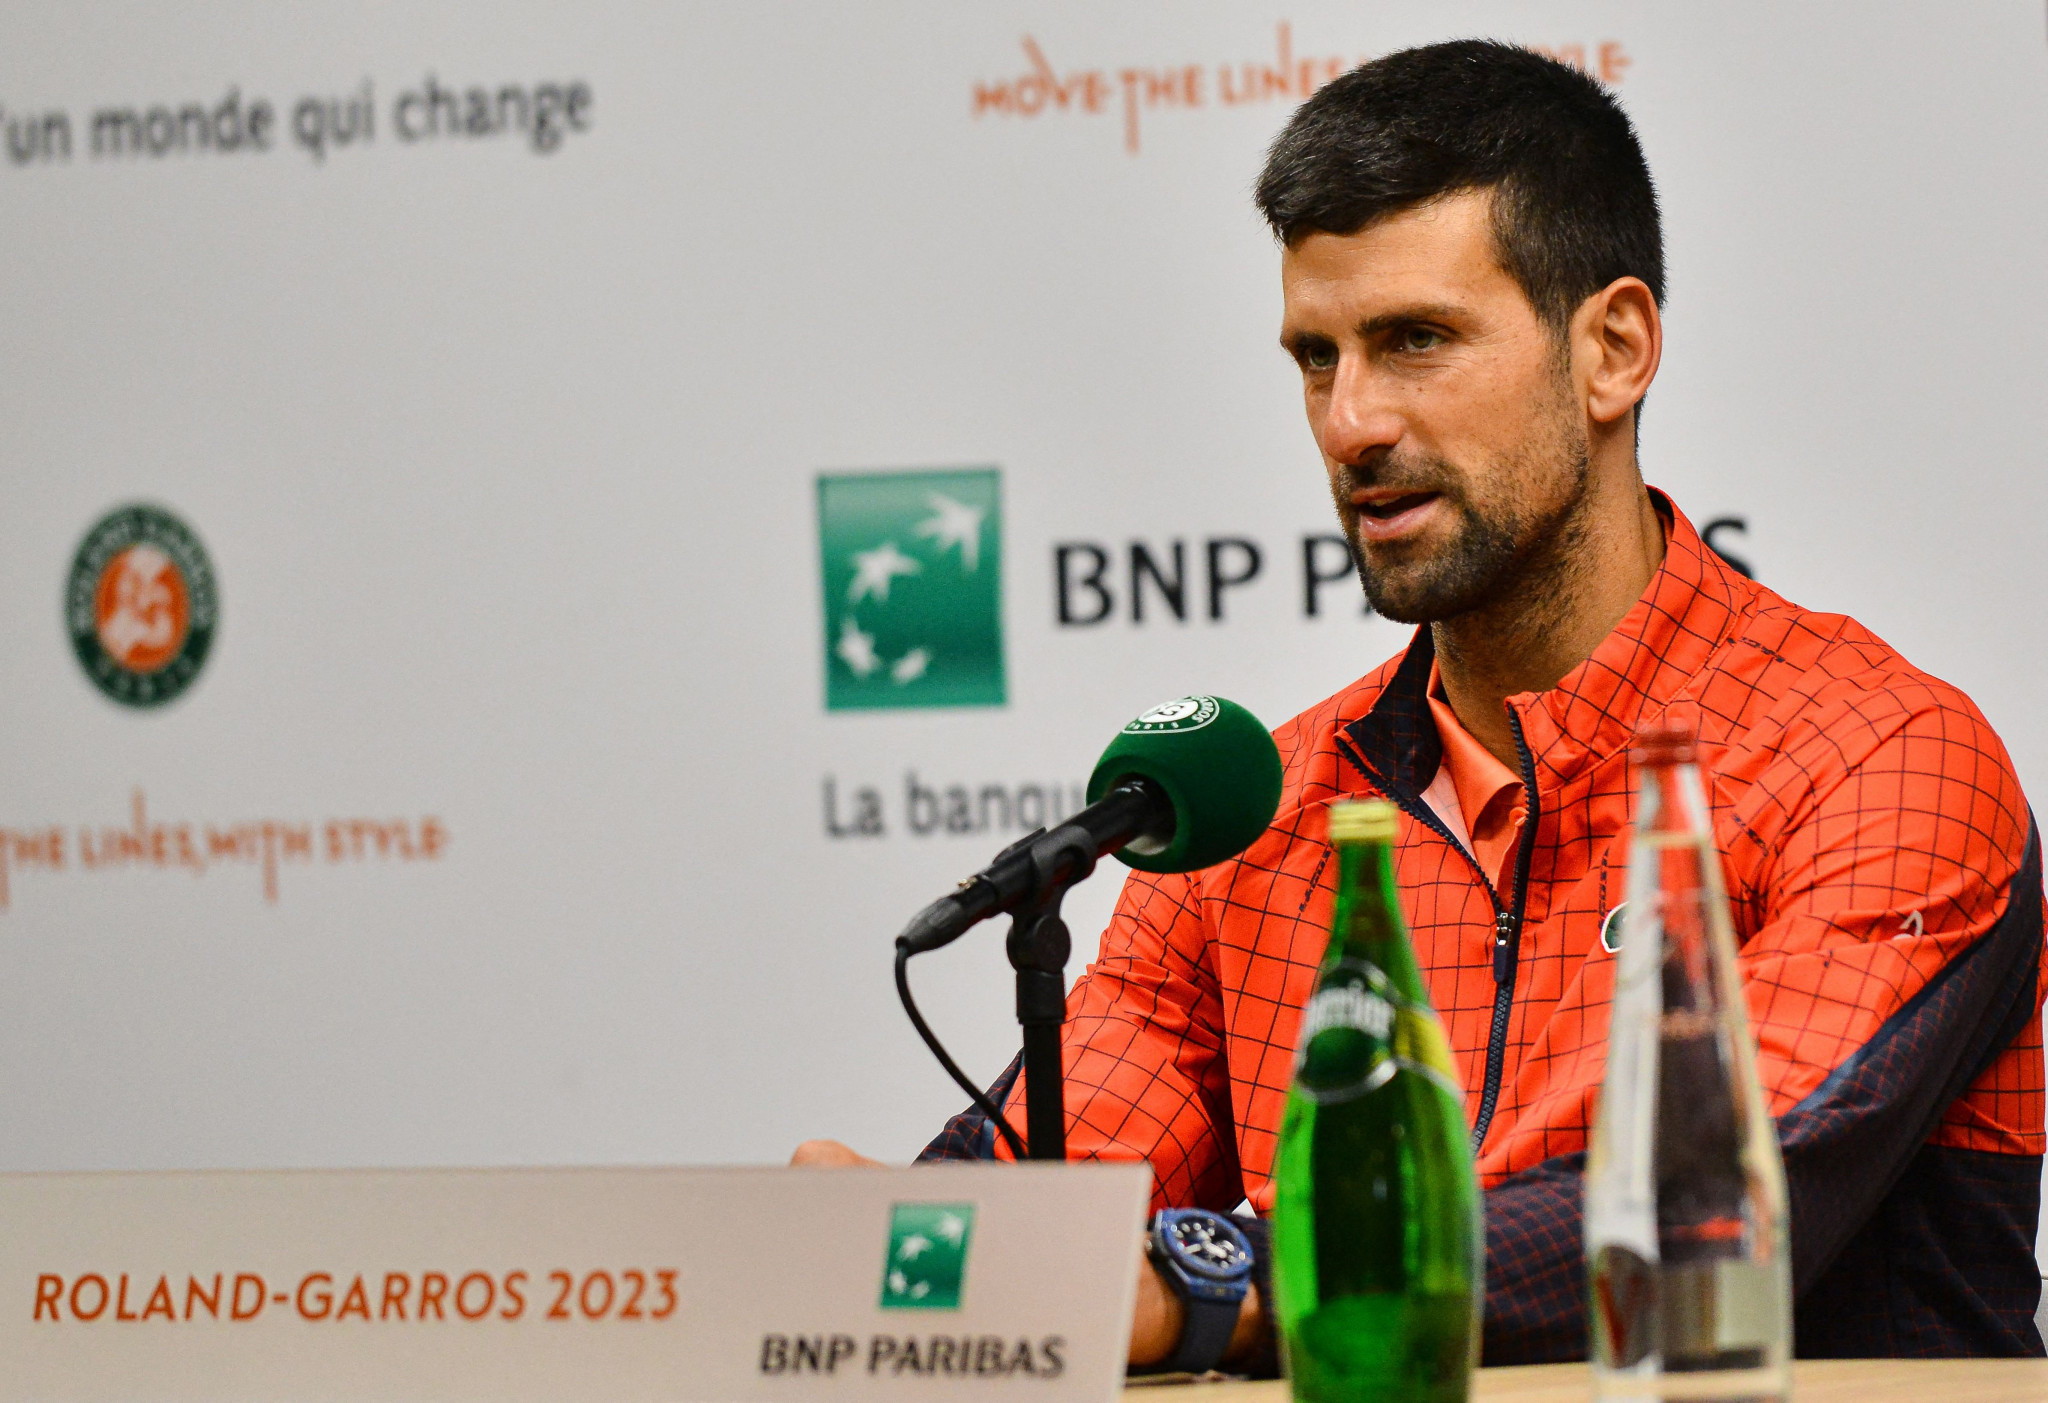 French Sports Minister warns Djokovic to refrain from further political messages